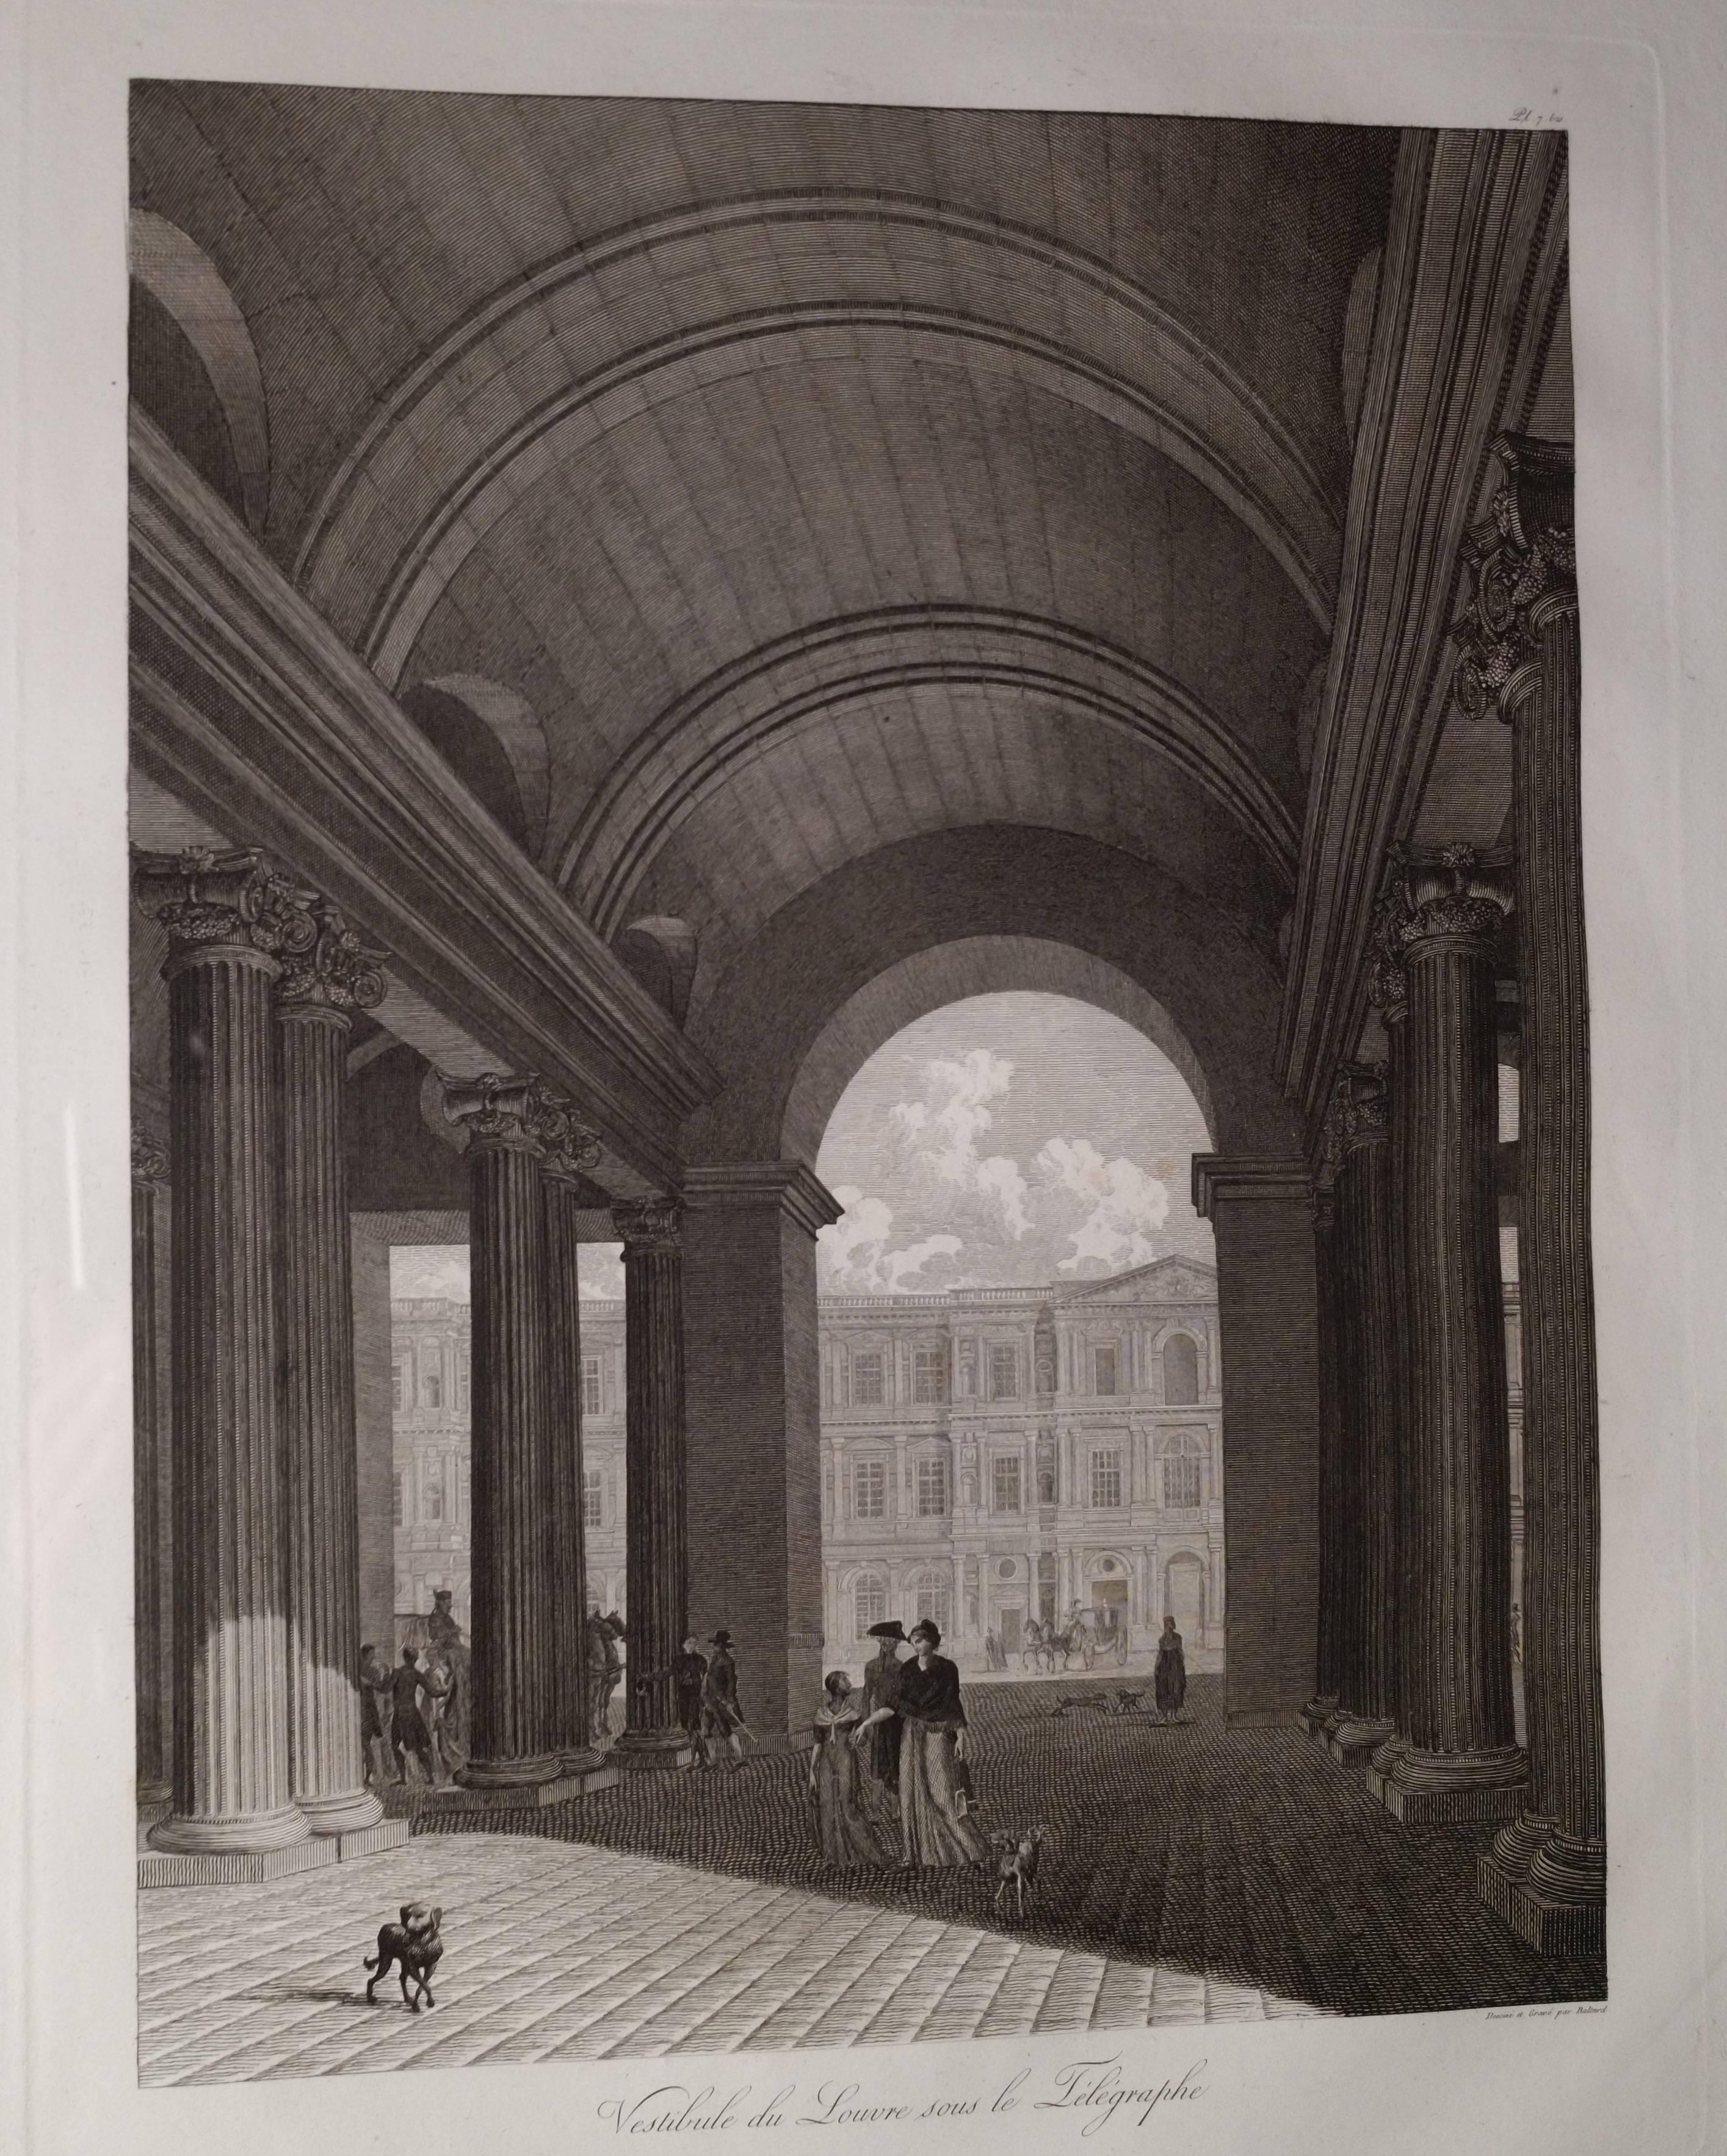 Engraved Set of 9 Engravings, Views Palace of Le Louvre Paris, circa 1805 by Balard. For Sale